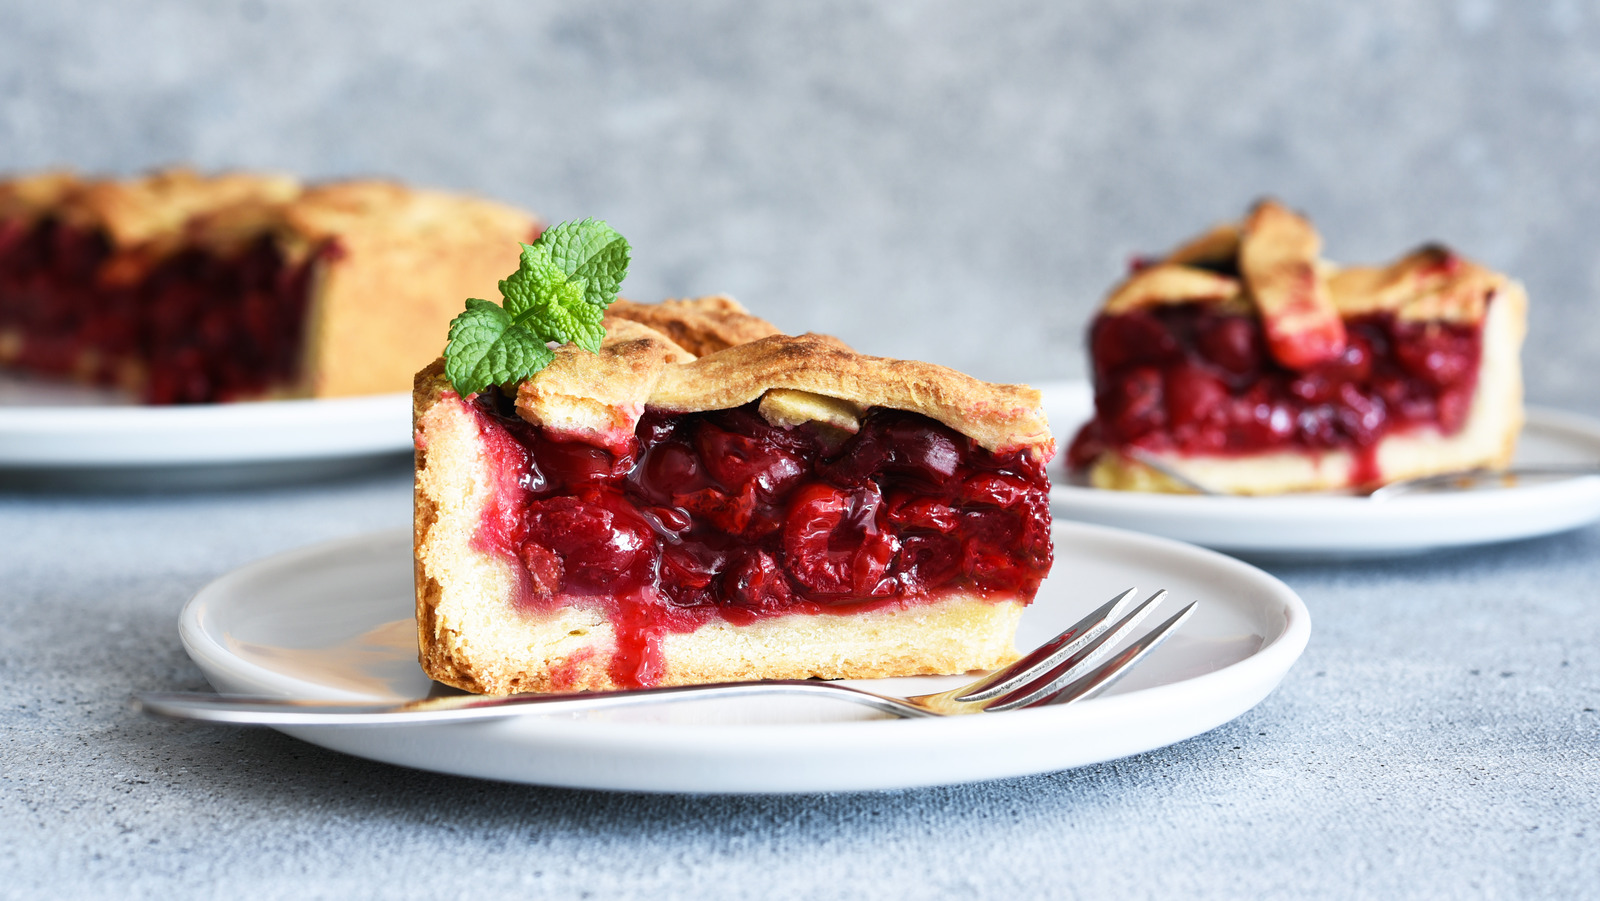 Why You Should Add More Fruit To Canned Pie Filling - Tasting Table